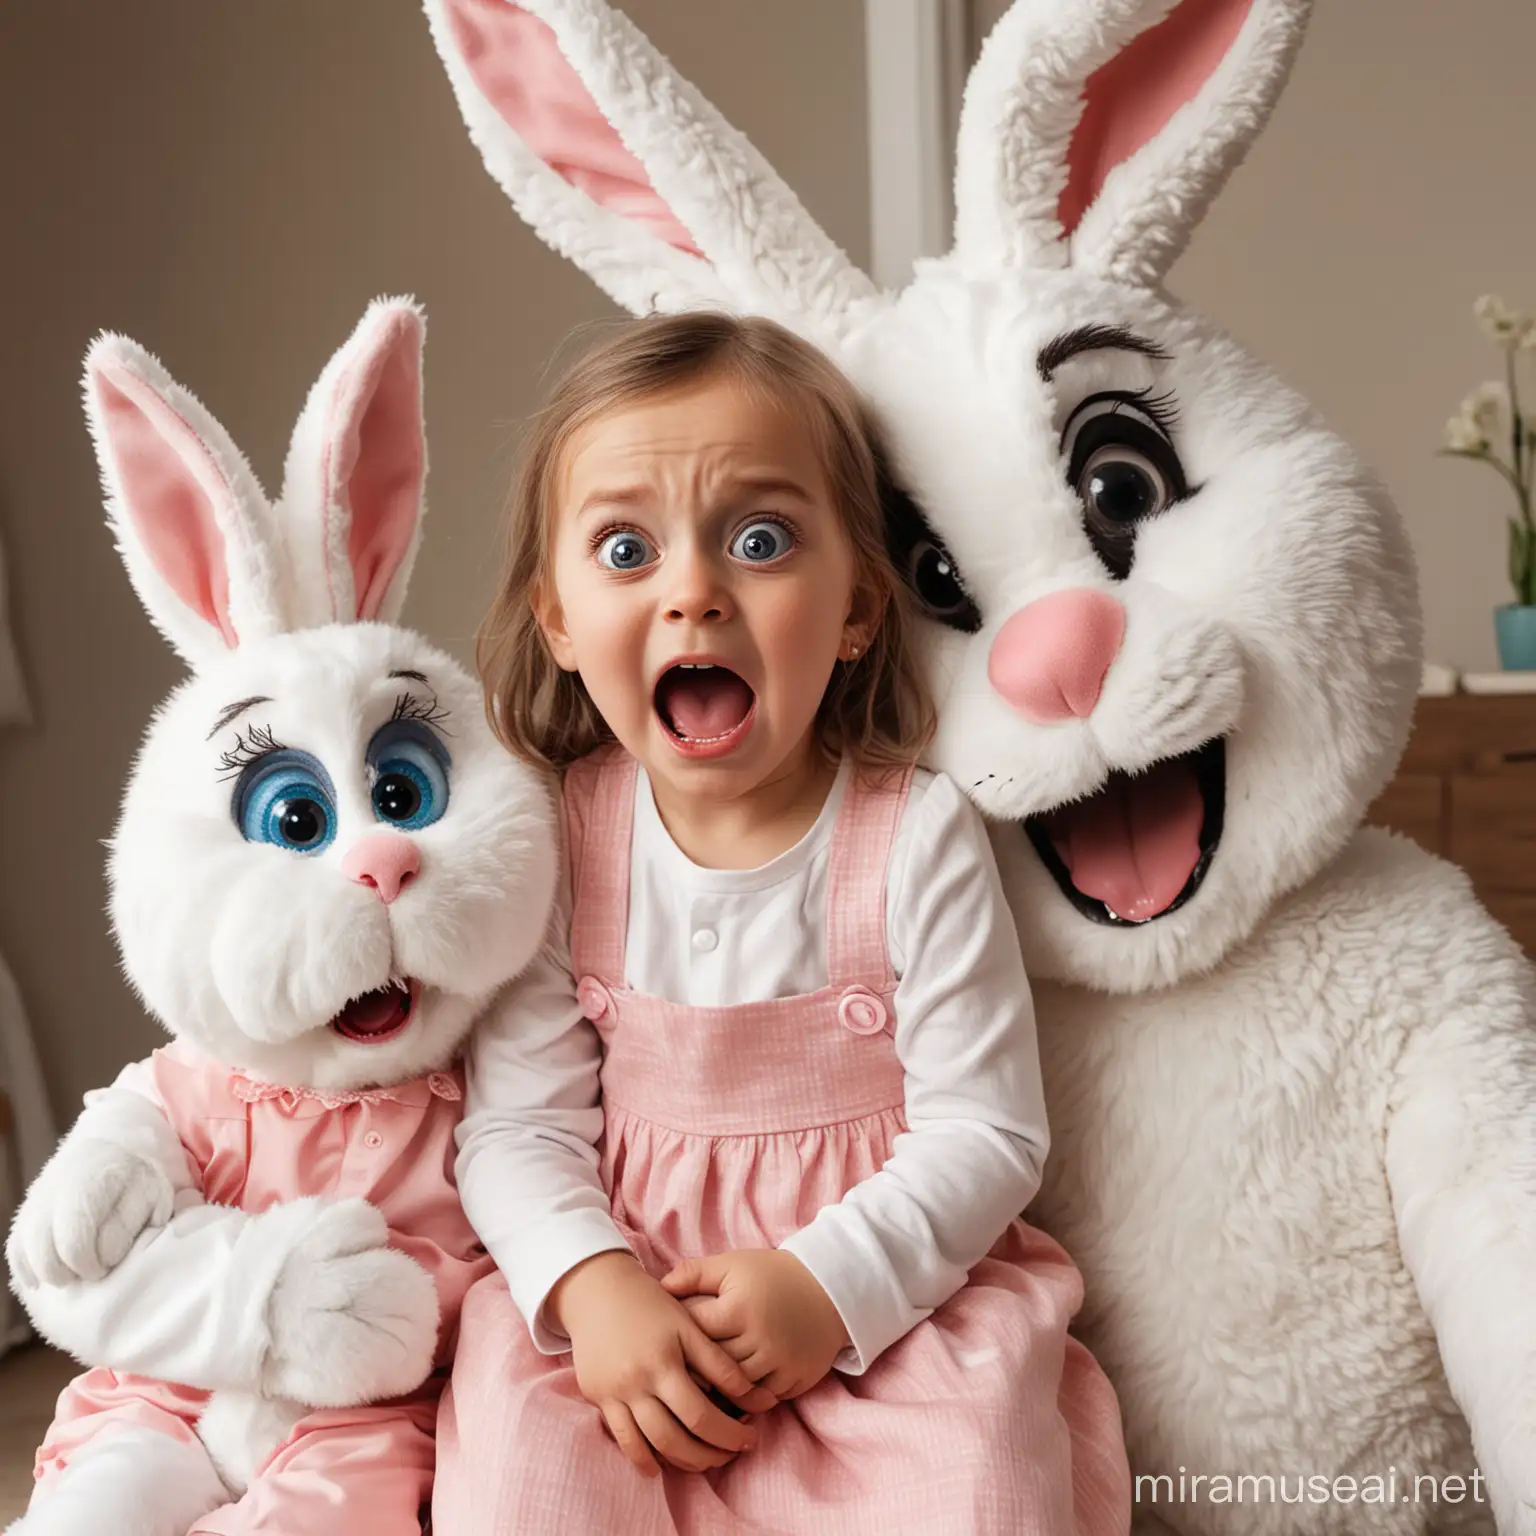 a young girl and a baby boy sitting on the Easter Bunny's lap, they are terrified and crying, the Easter Bunny has big googly eyes and an evil smile